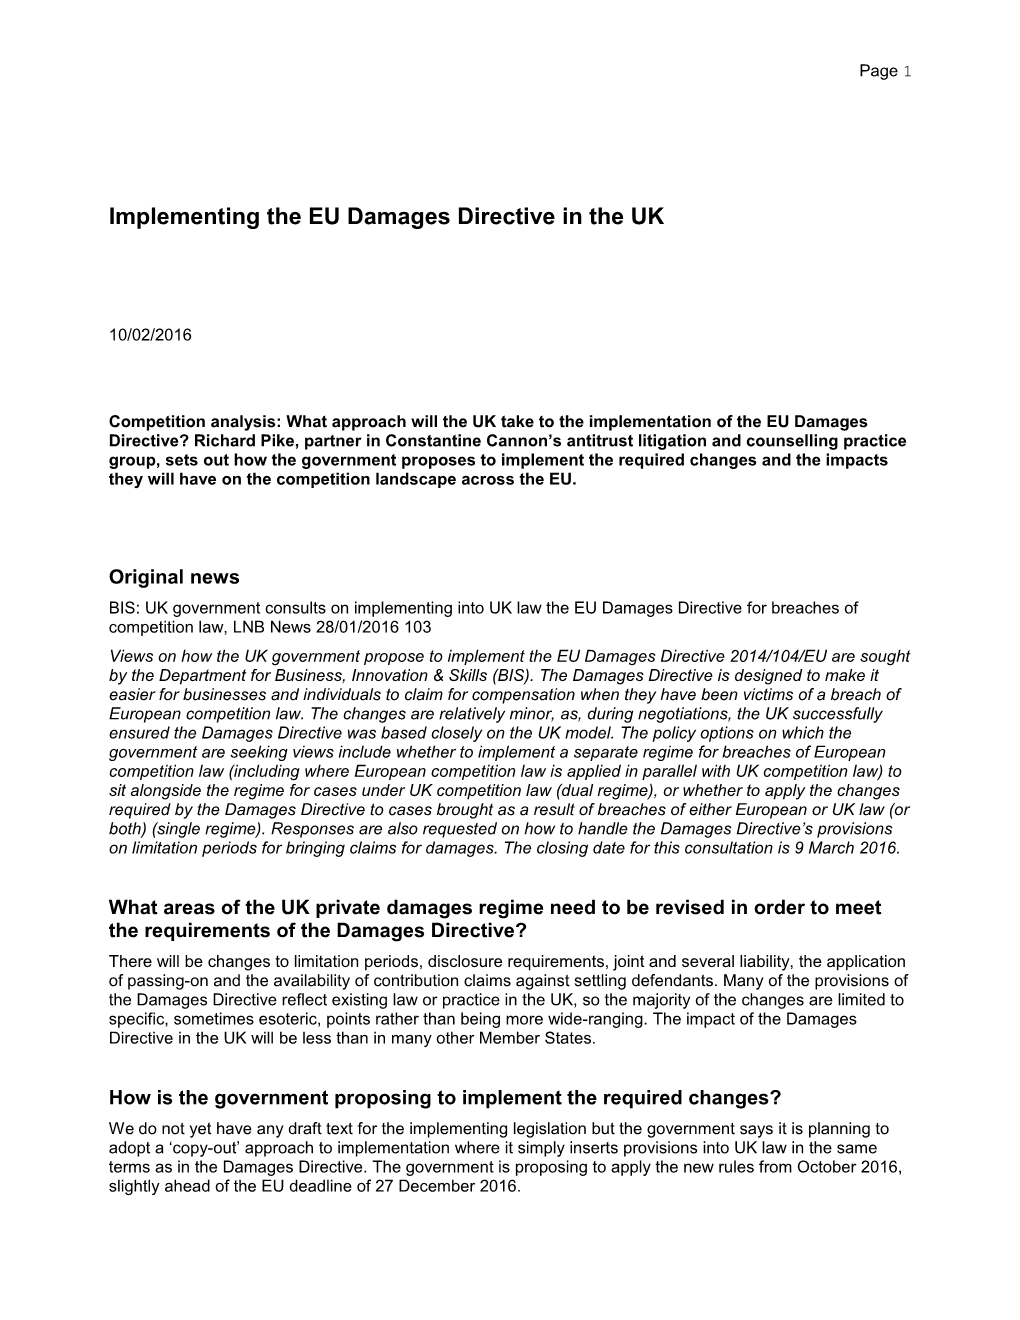 Implementing the EU Damages Directive in the UK